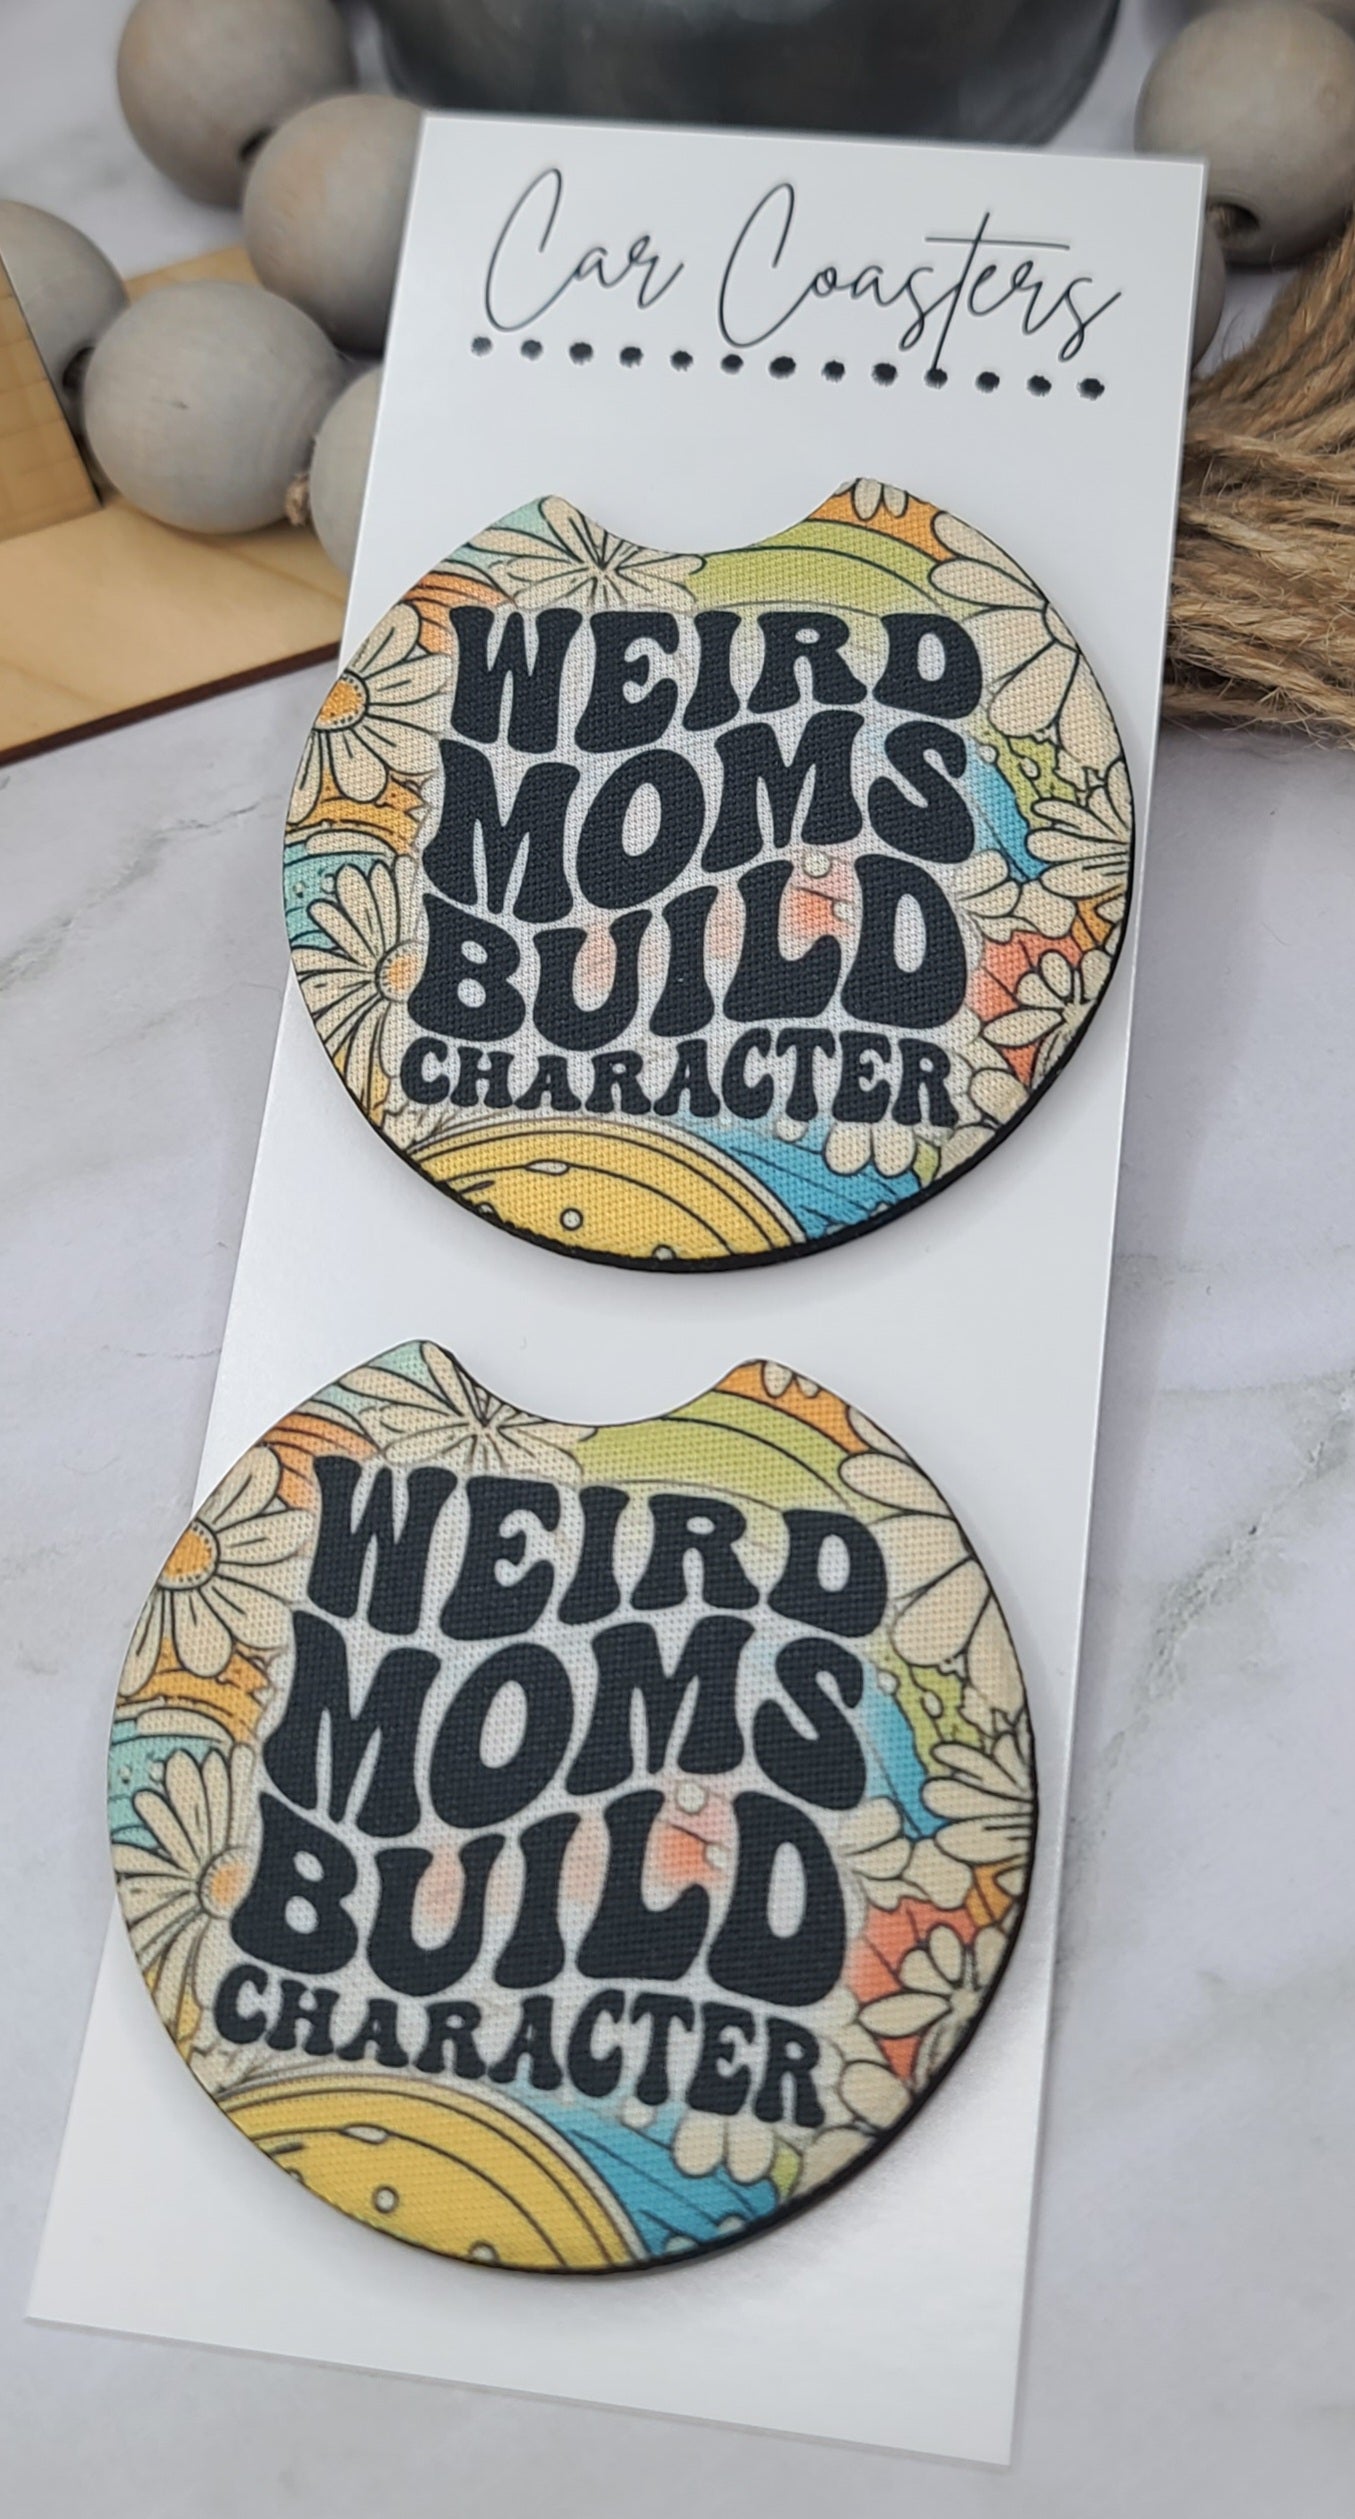 Weird Moms Build Character  Car Coasters